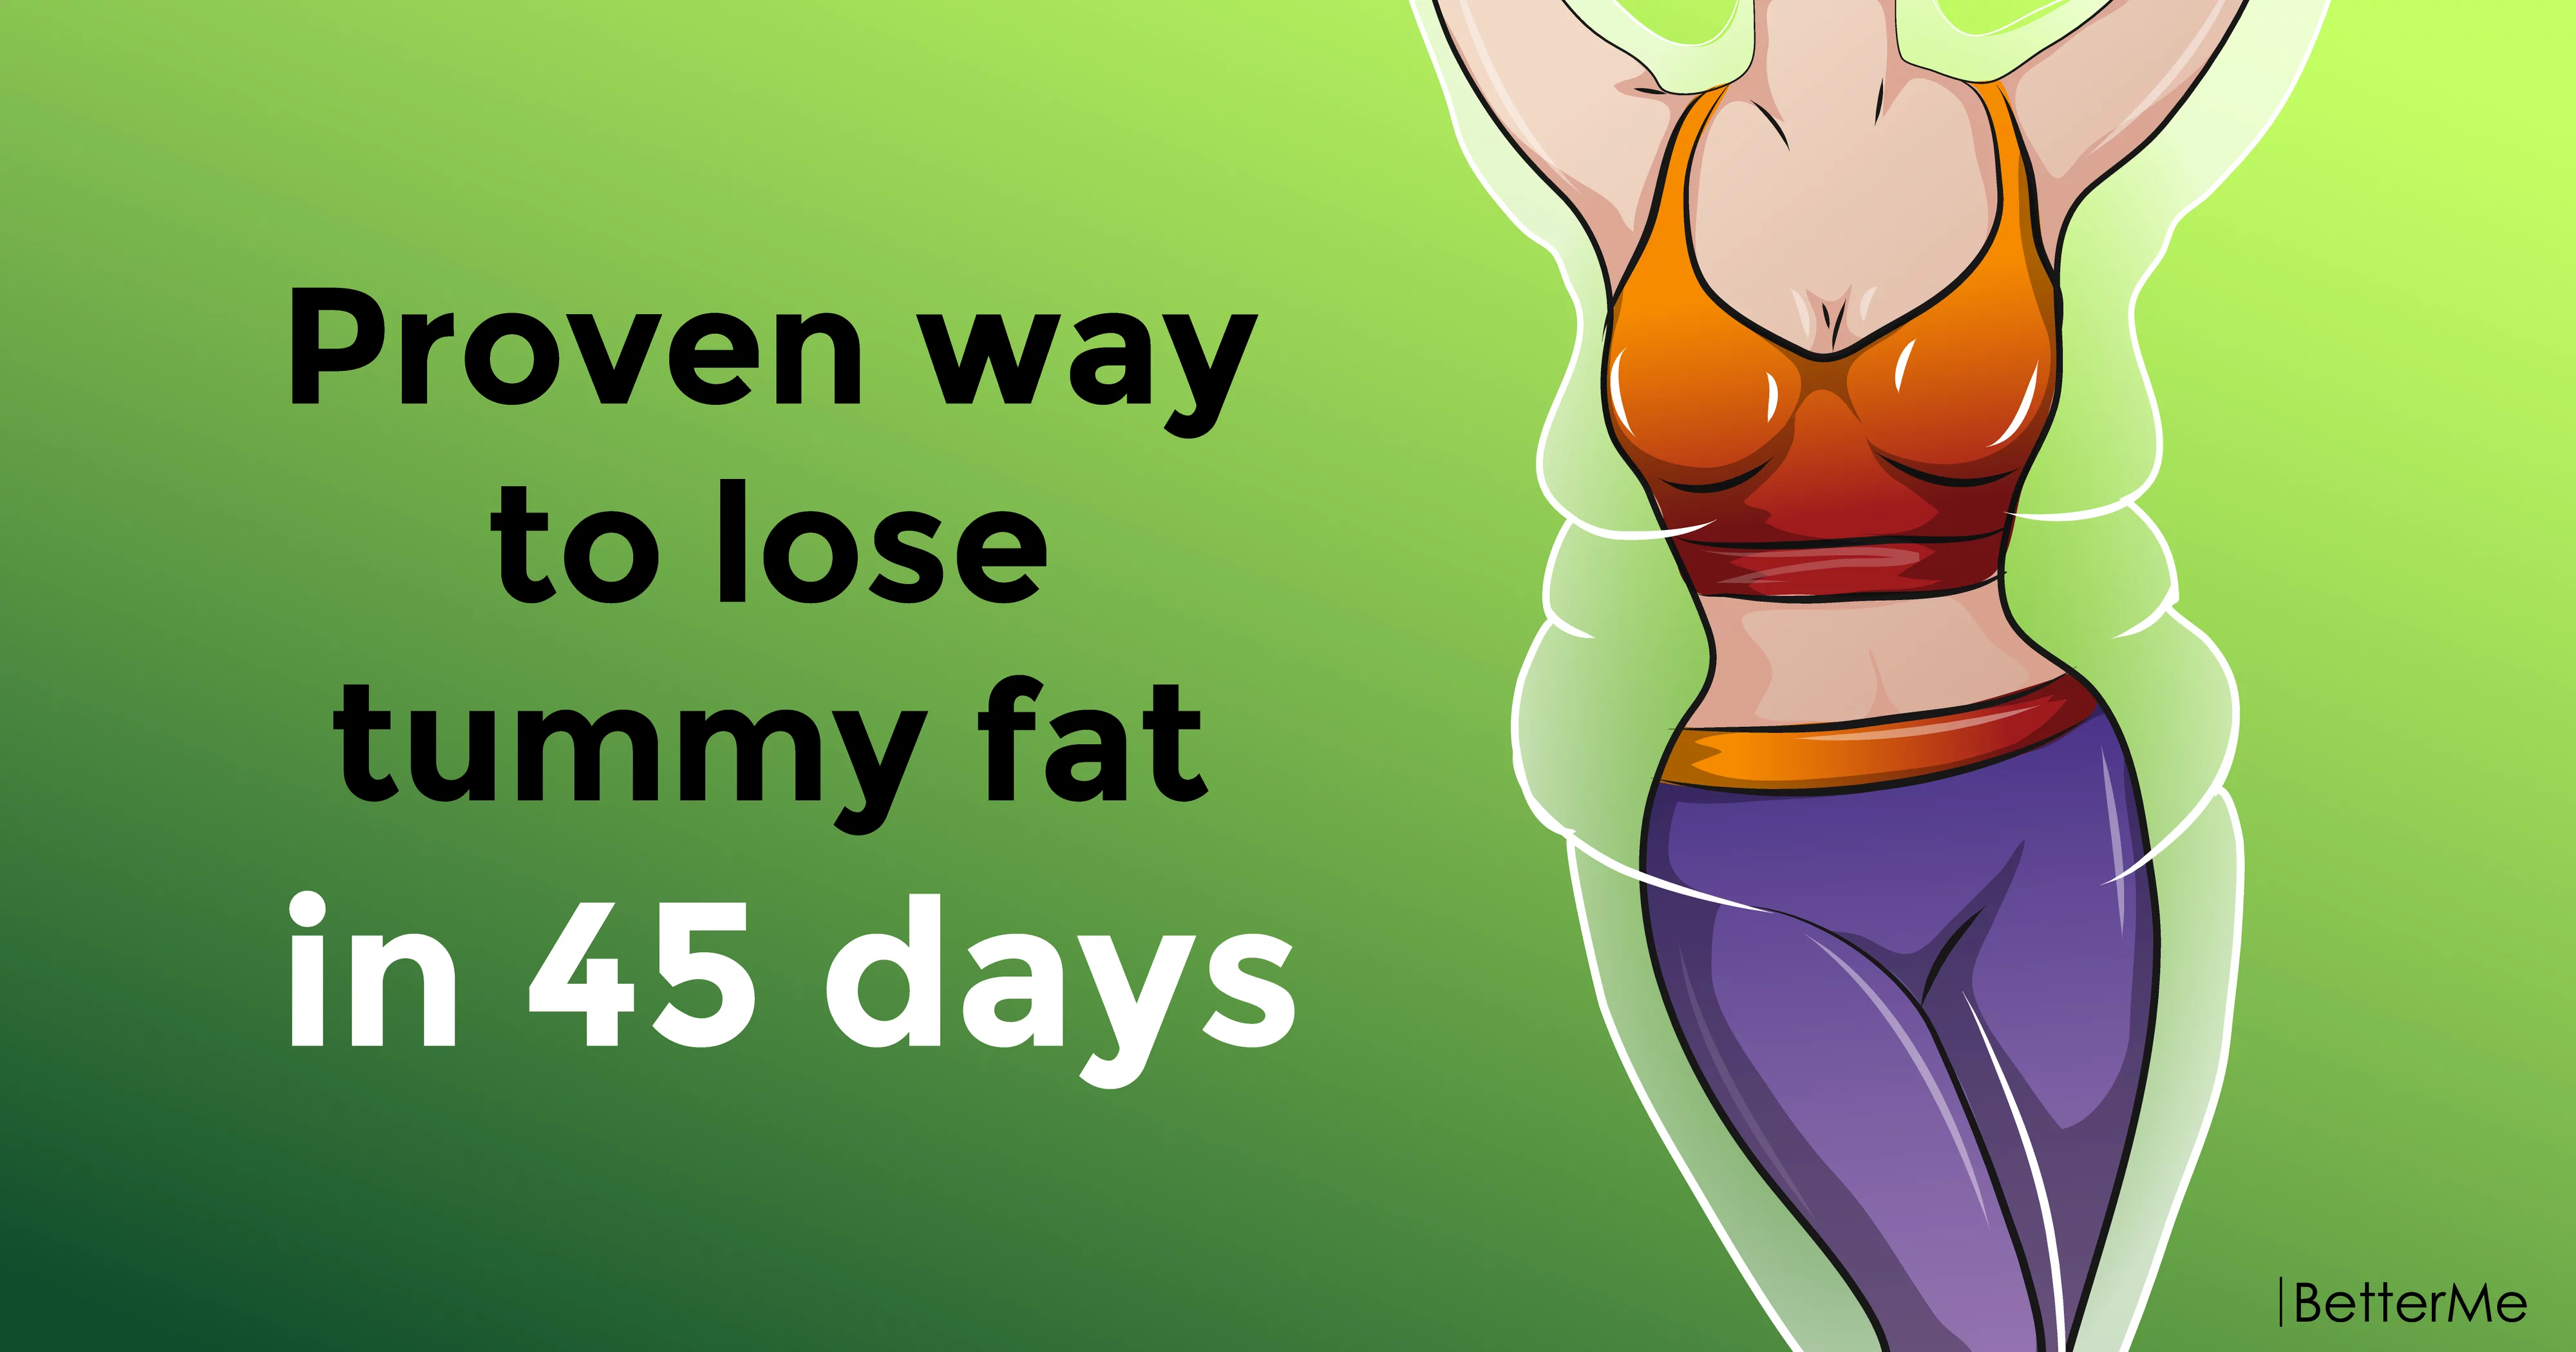 Proven way to get rid of belly fat in 45 days